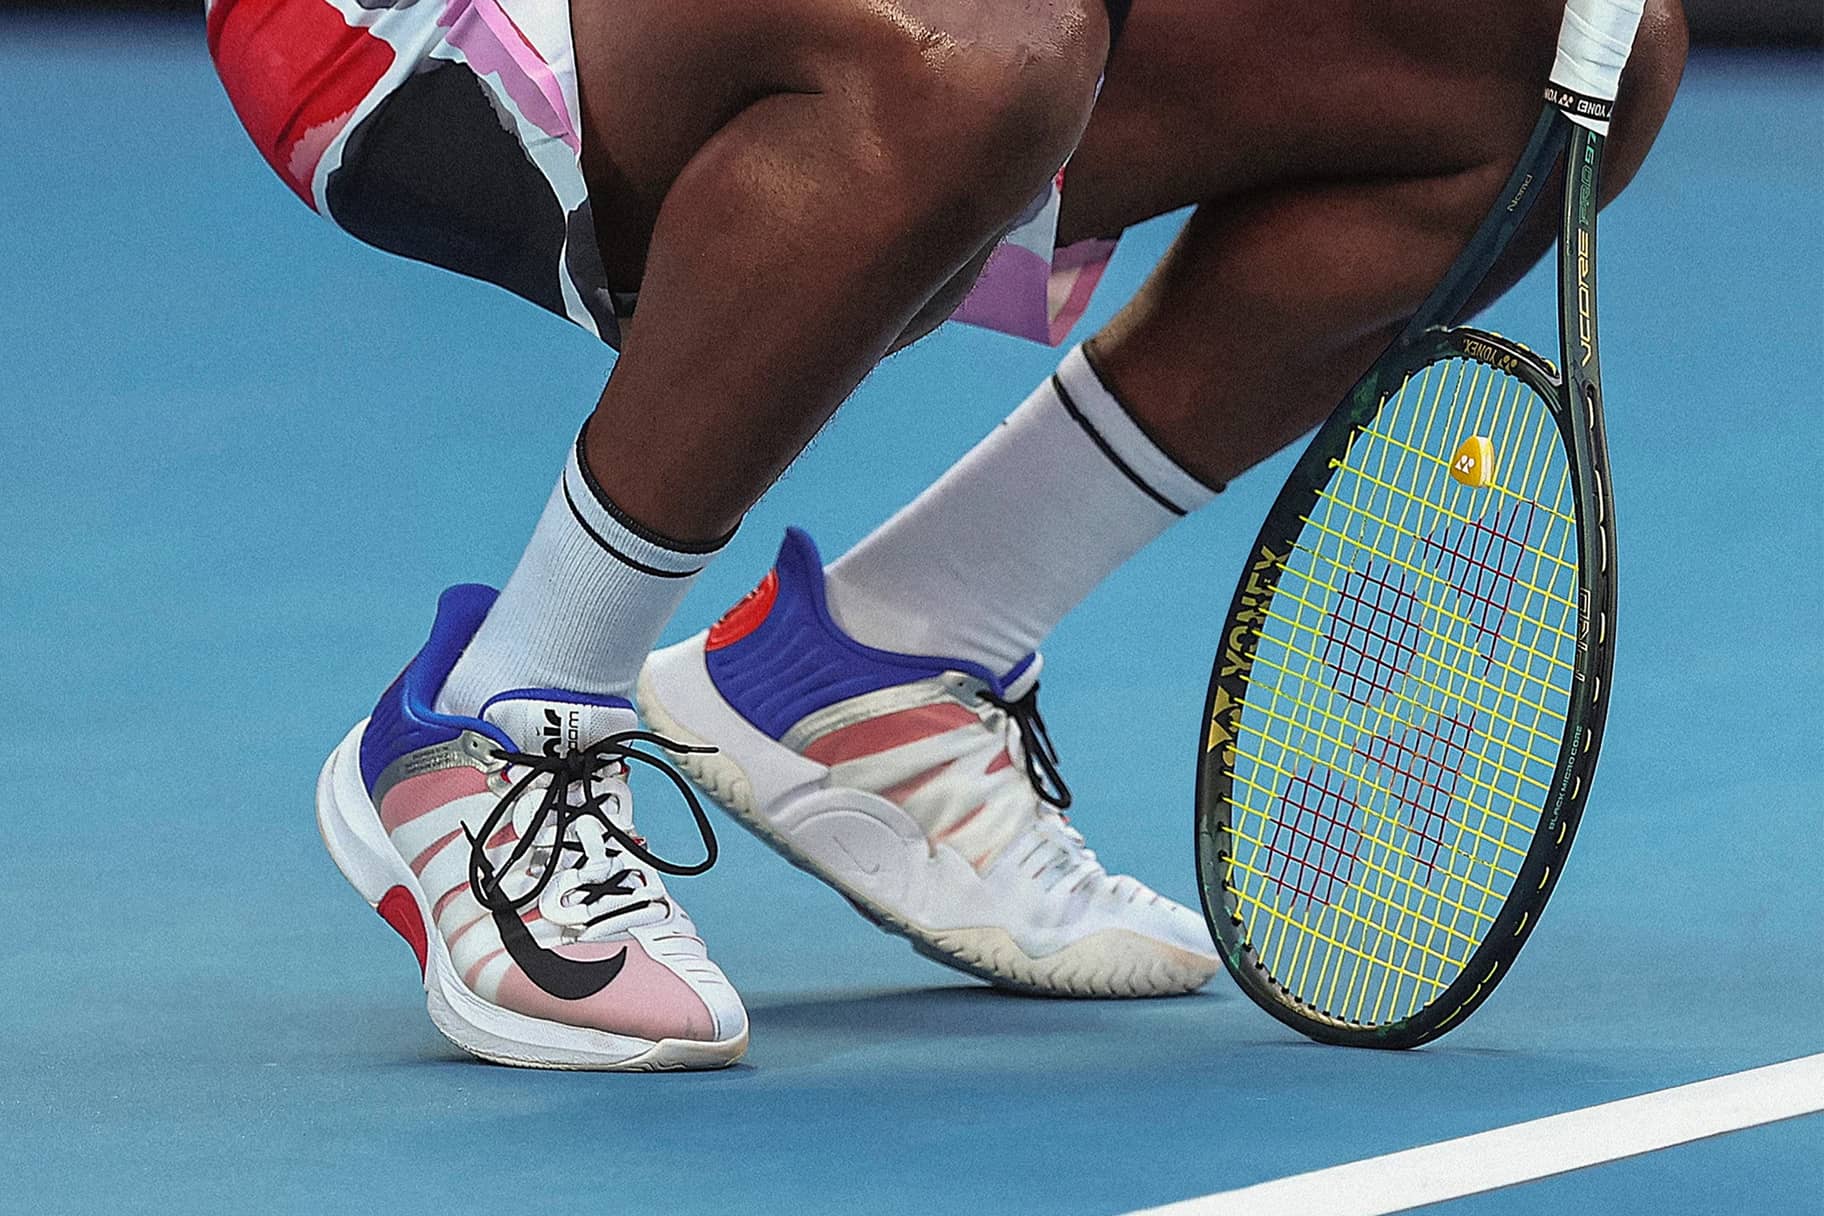 The Best Nike Shoes To Play Tennis on a Hard Court